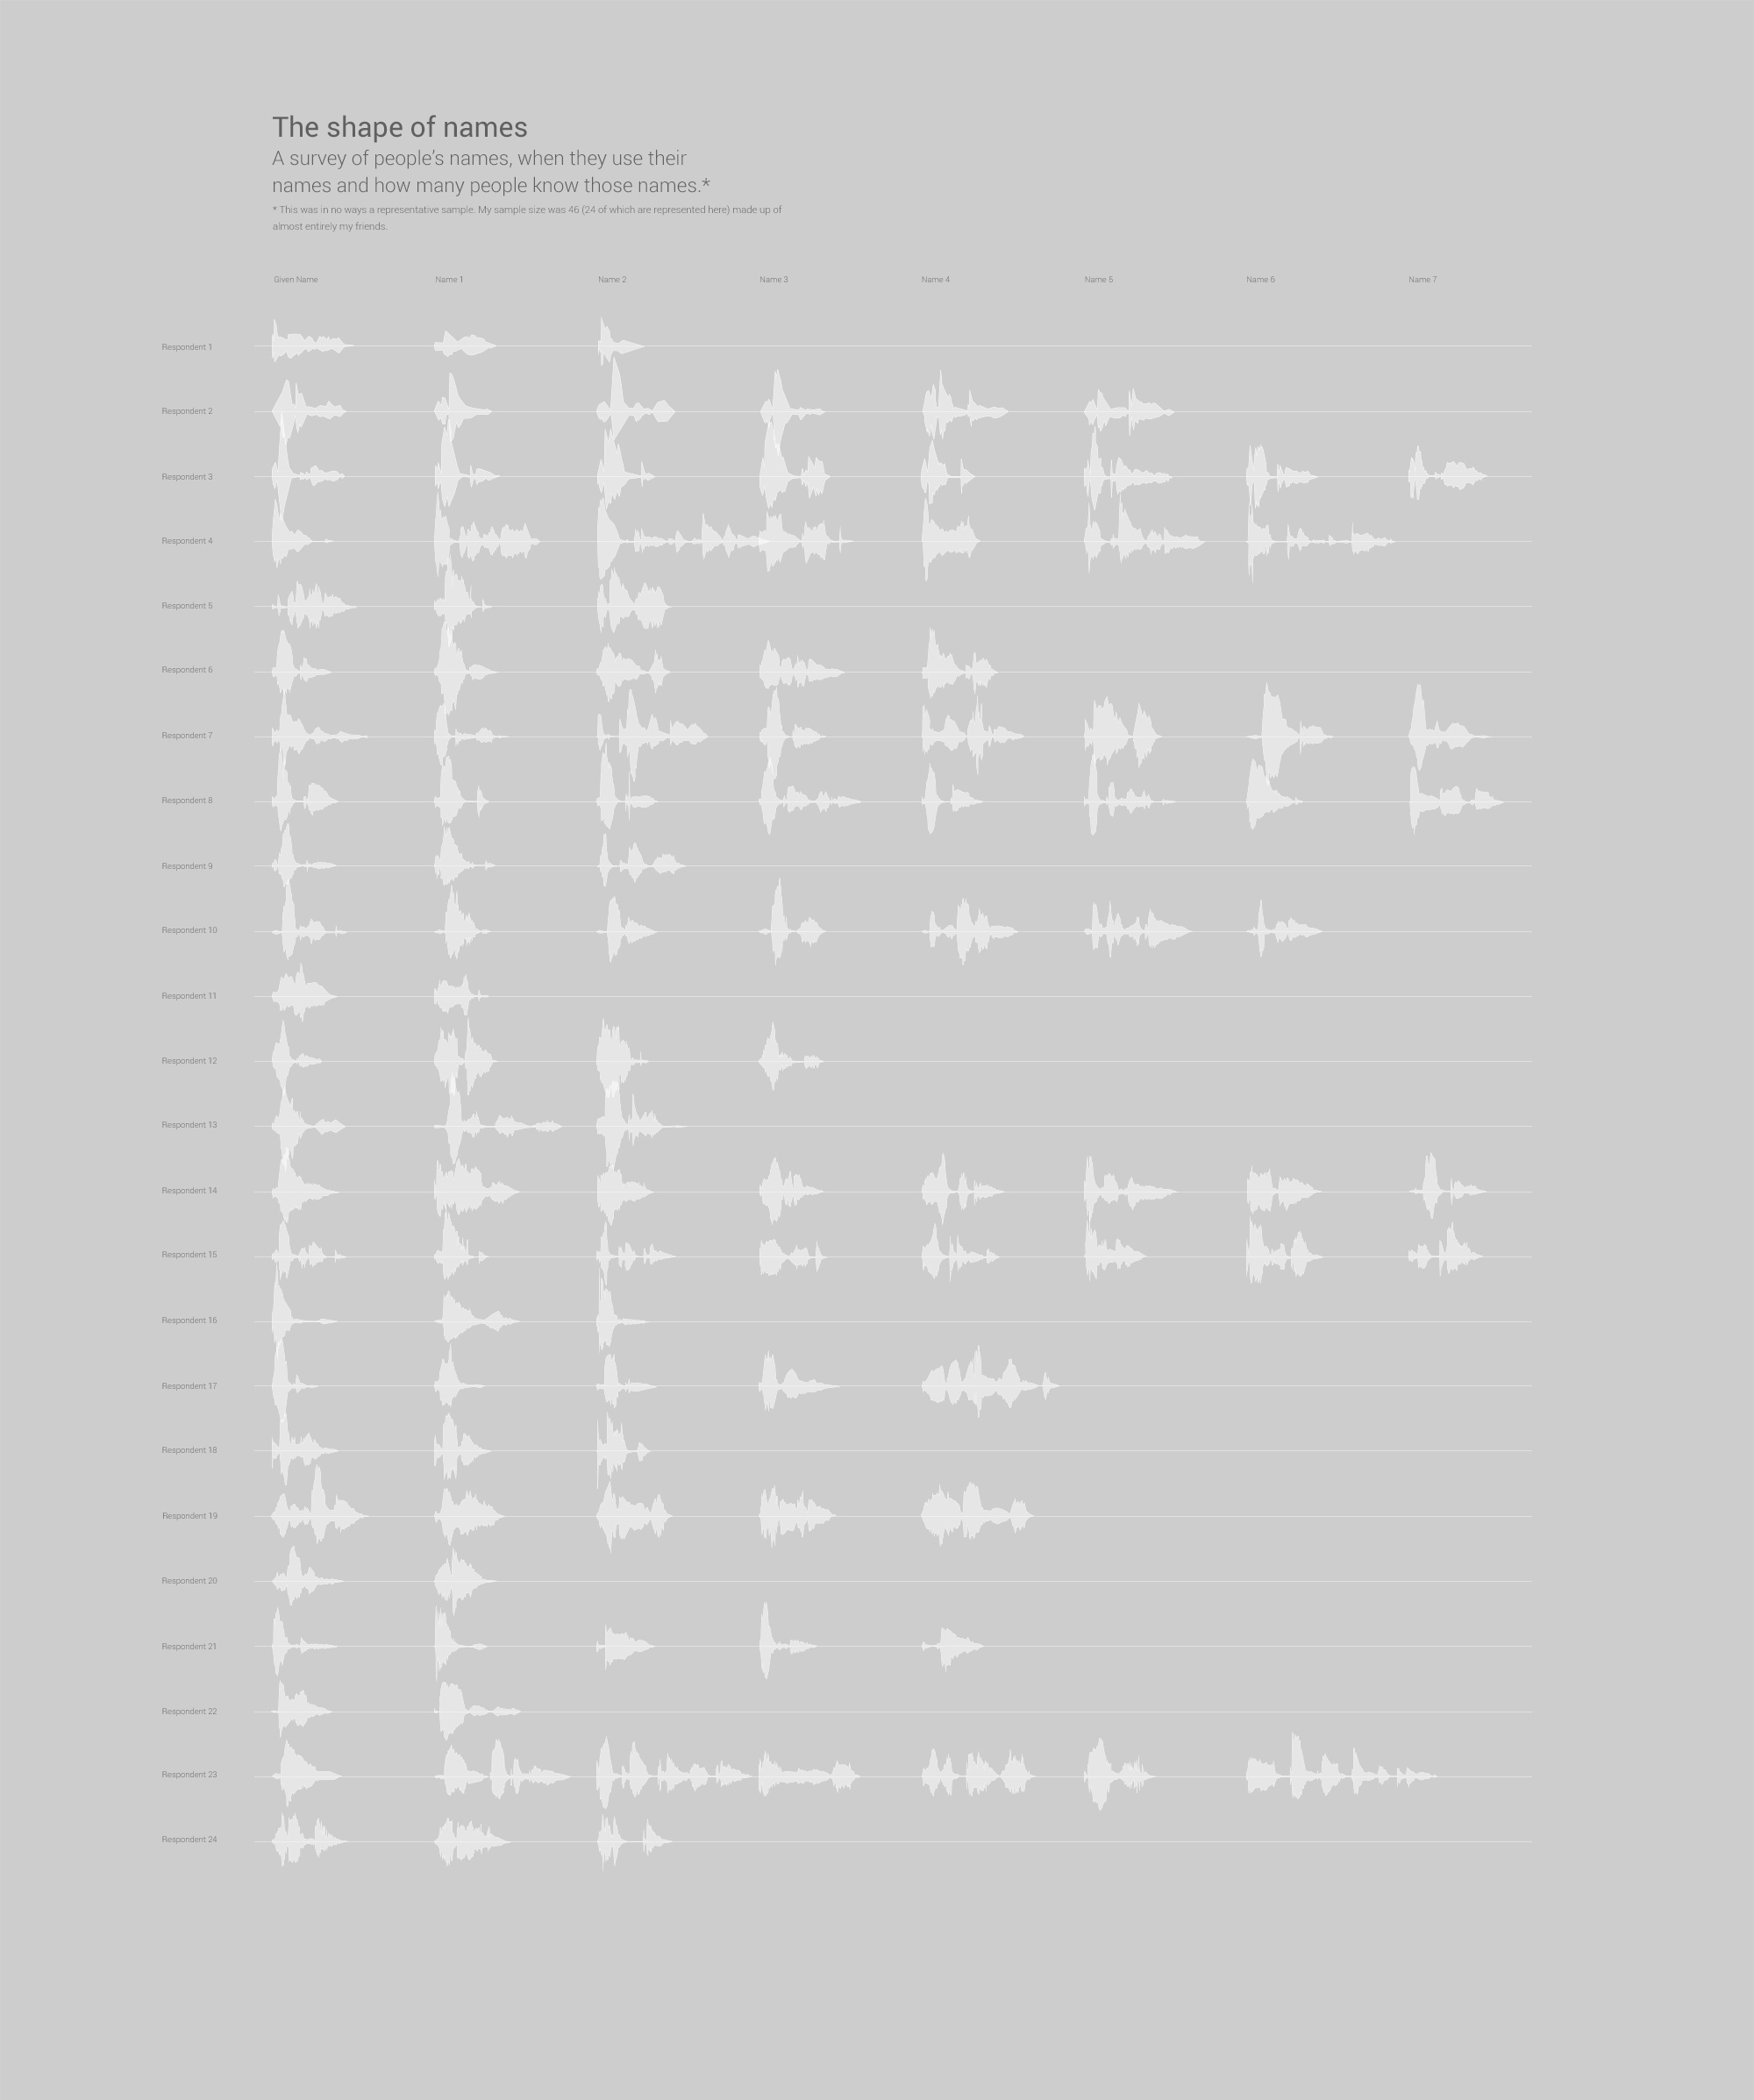 The waveforms of the names of people surveyed.